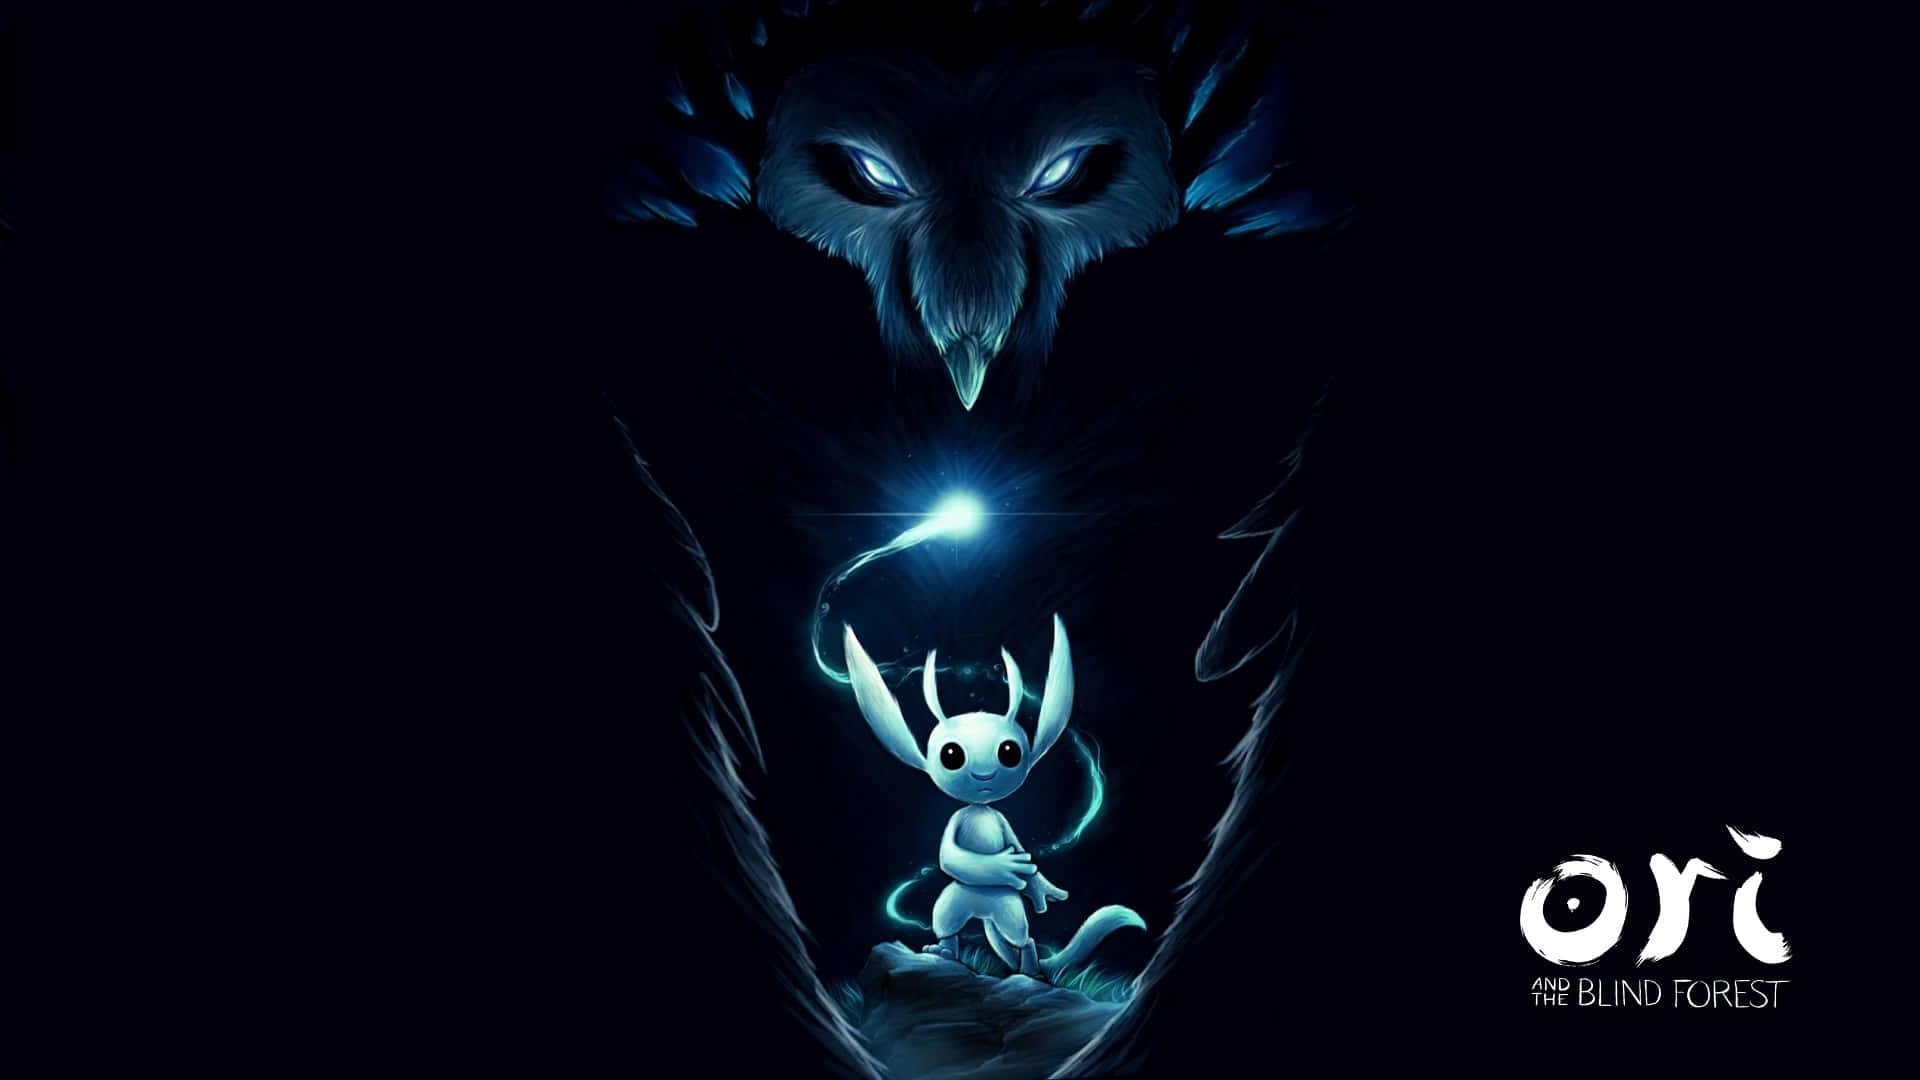 Ori And The Blind Forest wallpapers HD for desktop backgrounds